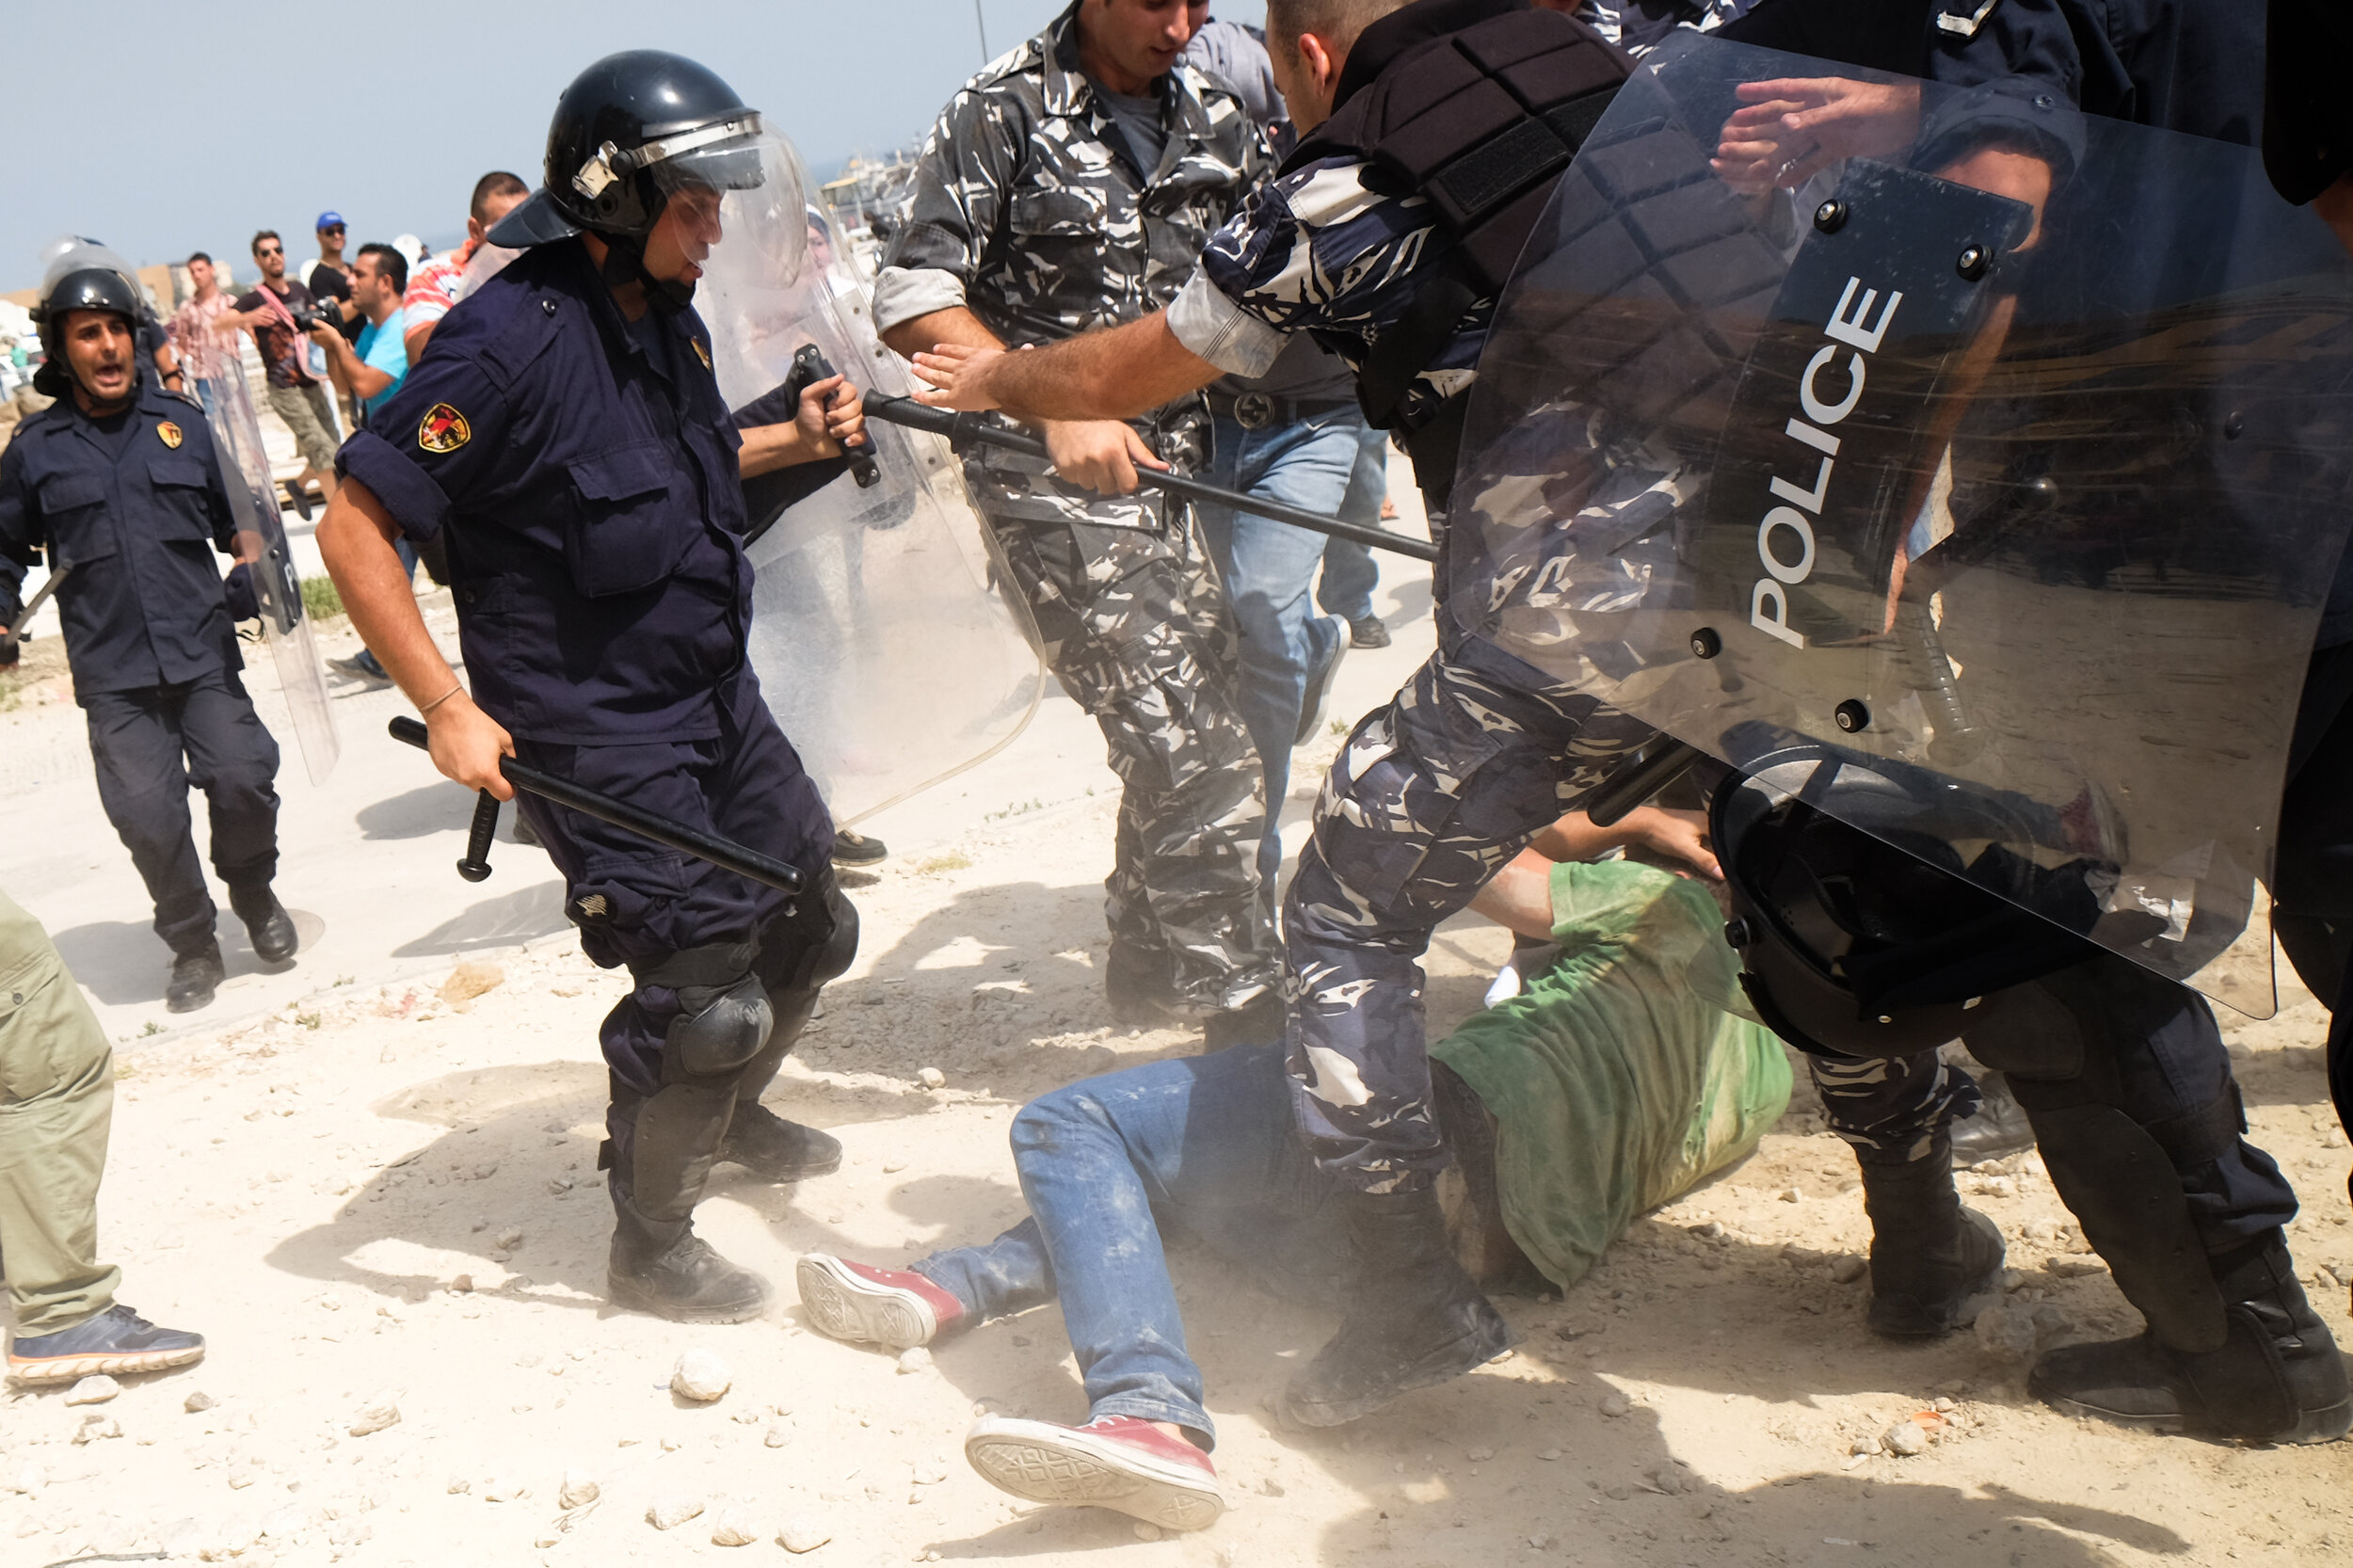  the five police men beat up the peaceful protestor before dragging him and arresting him. during the protests in response to the waste crisis in Lebanon. Beirut 2015 